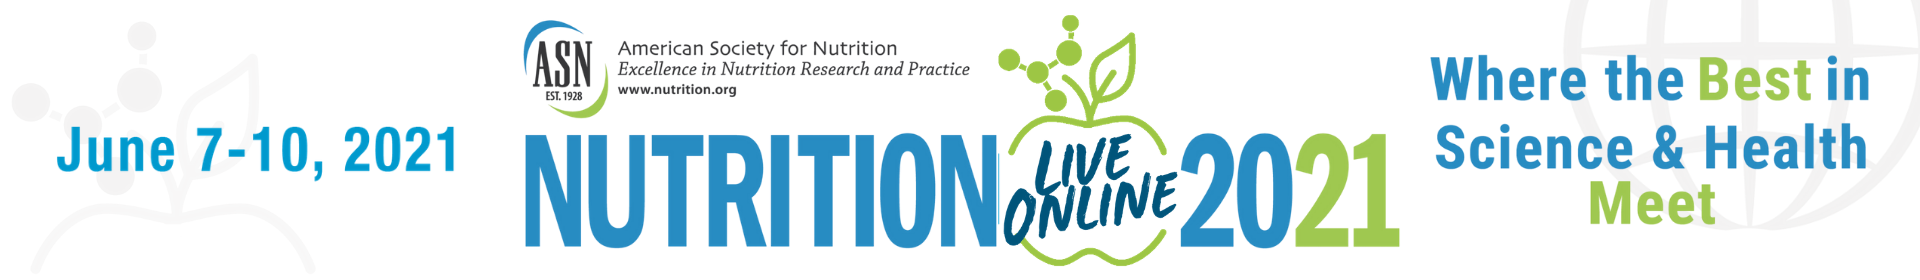 NUTRITION 2021 LIVE ONLINE, ASN Scientific Sessions & Annual Meeting Event Banner